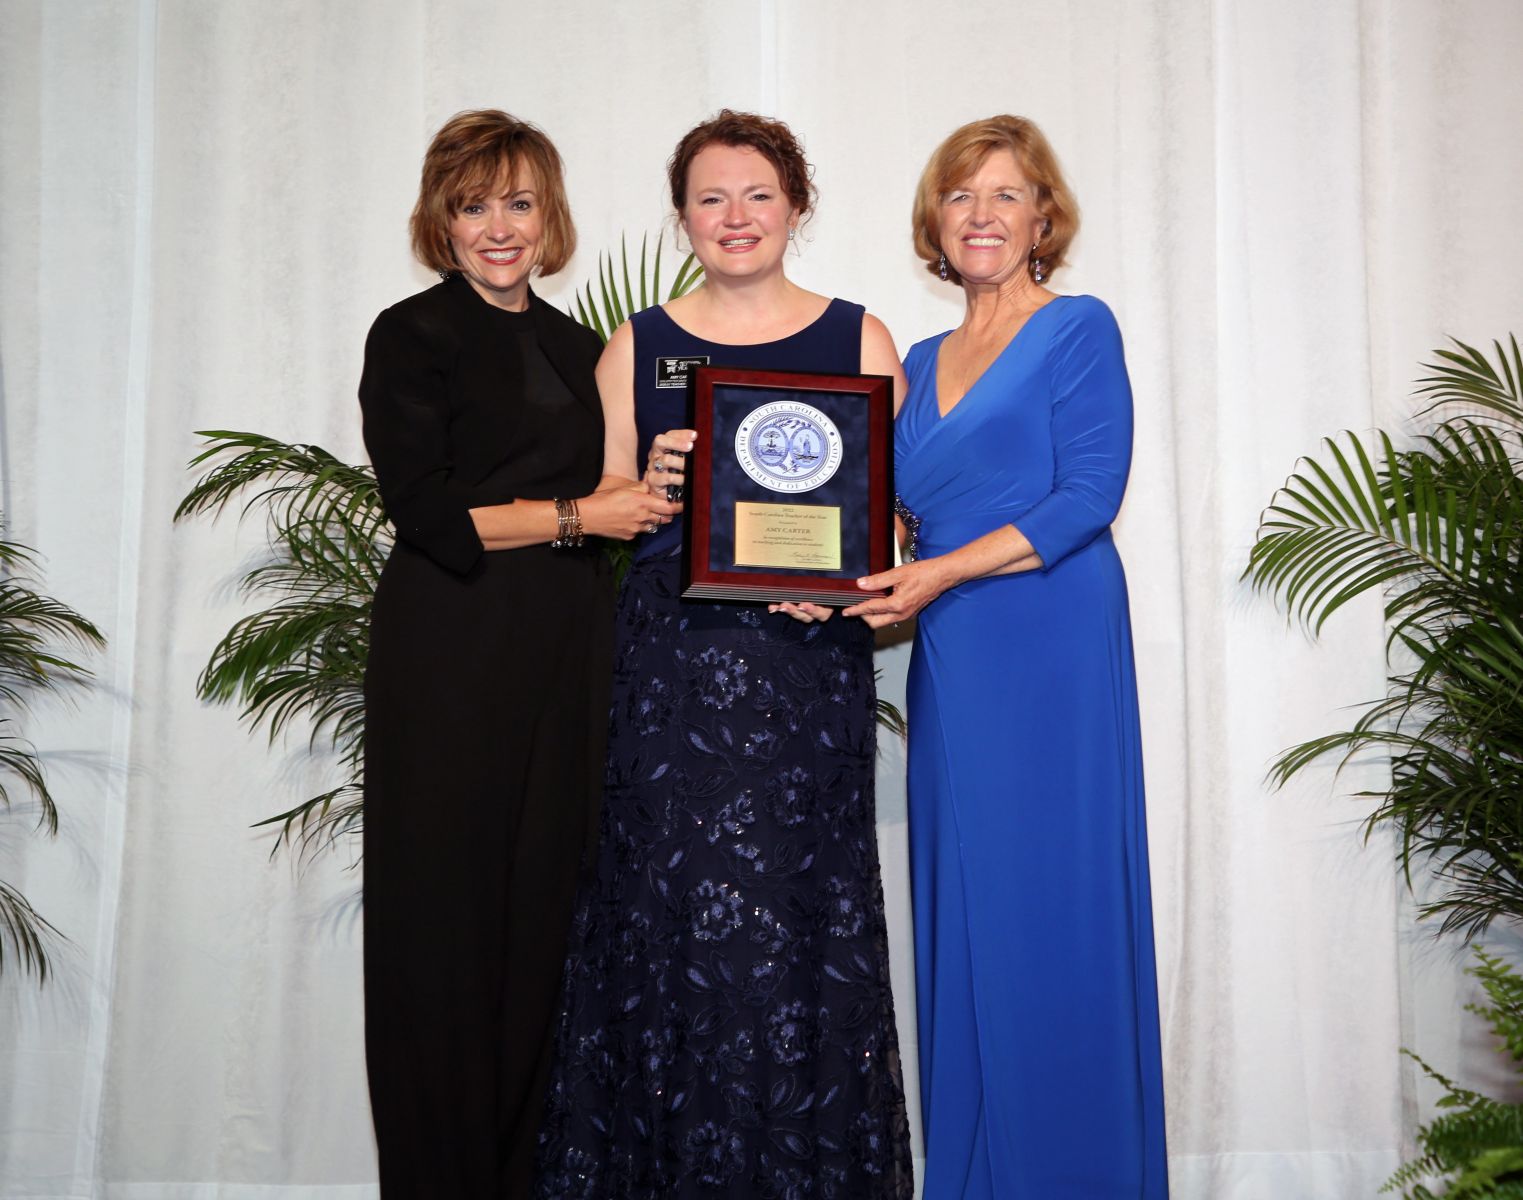 S.C. Superintendent of Education Molly Spearman (right) presented Chapin High School English teacher Amy Carter (center) with the S.C. Teacher of the Year award Wednesday night. (Photo/Provided)